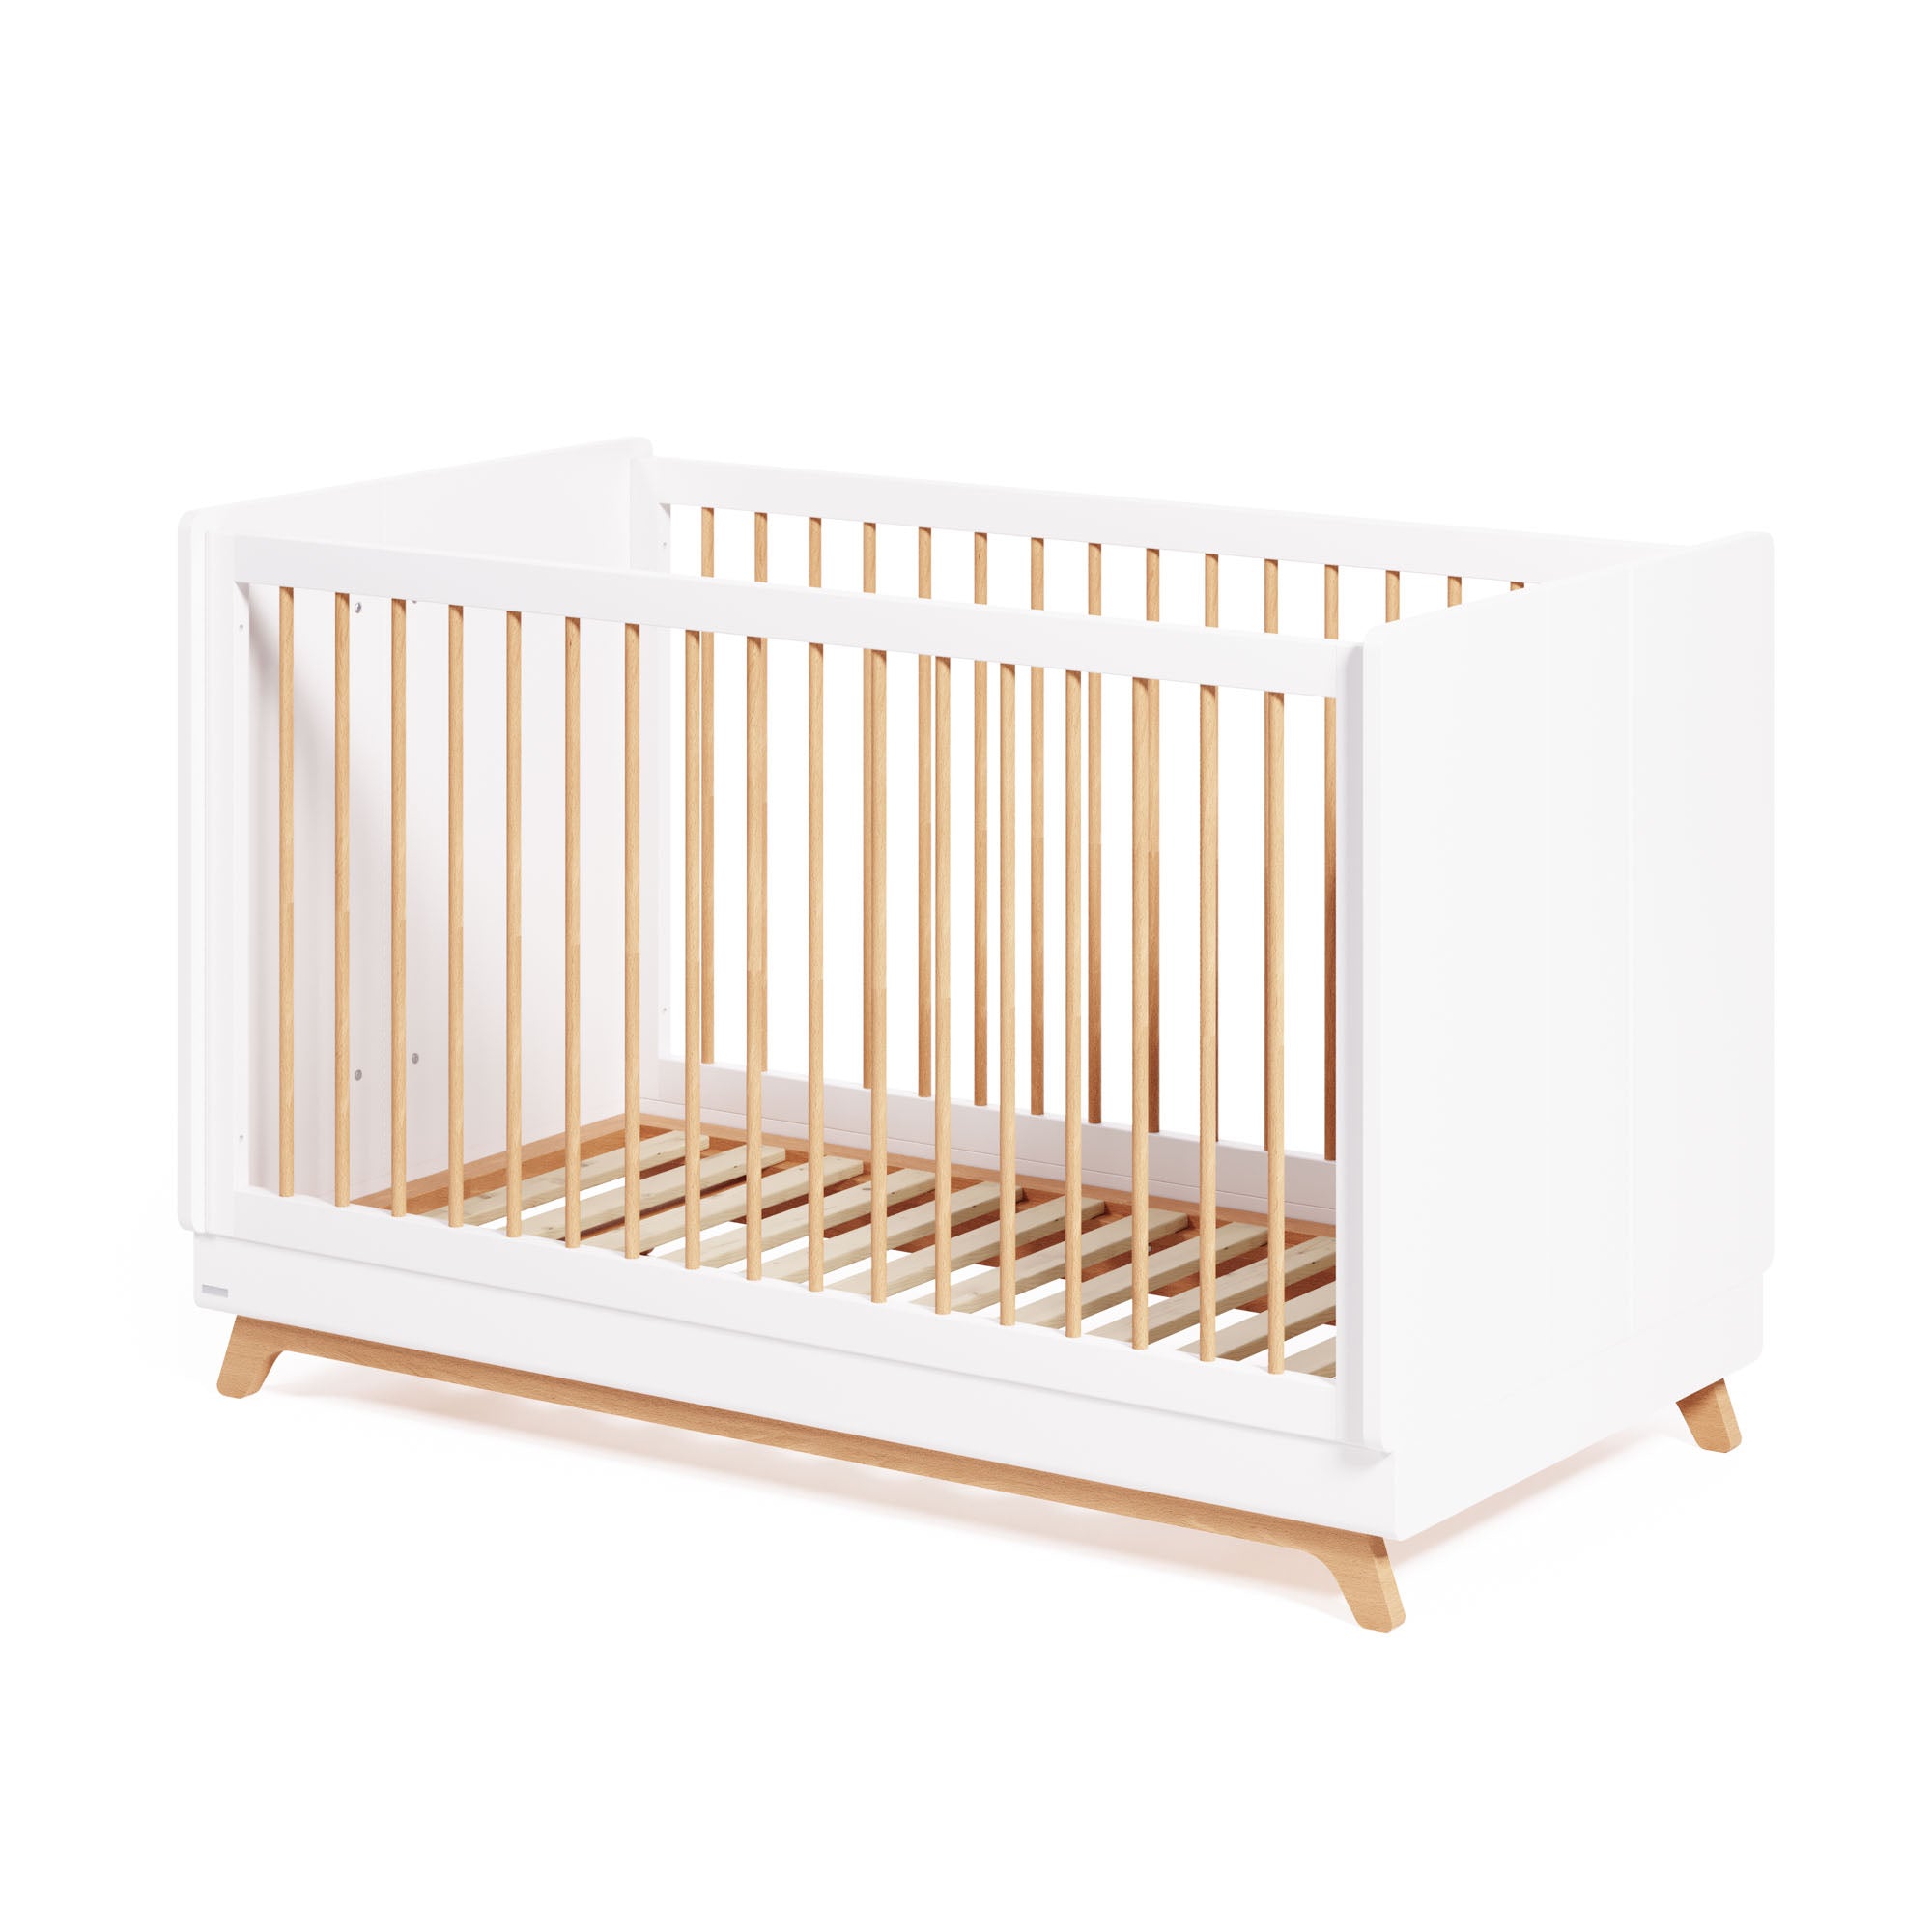 Maralis evolving cot made from solid beech wood with a white finish, 70 x 140 cm